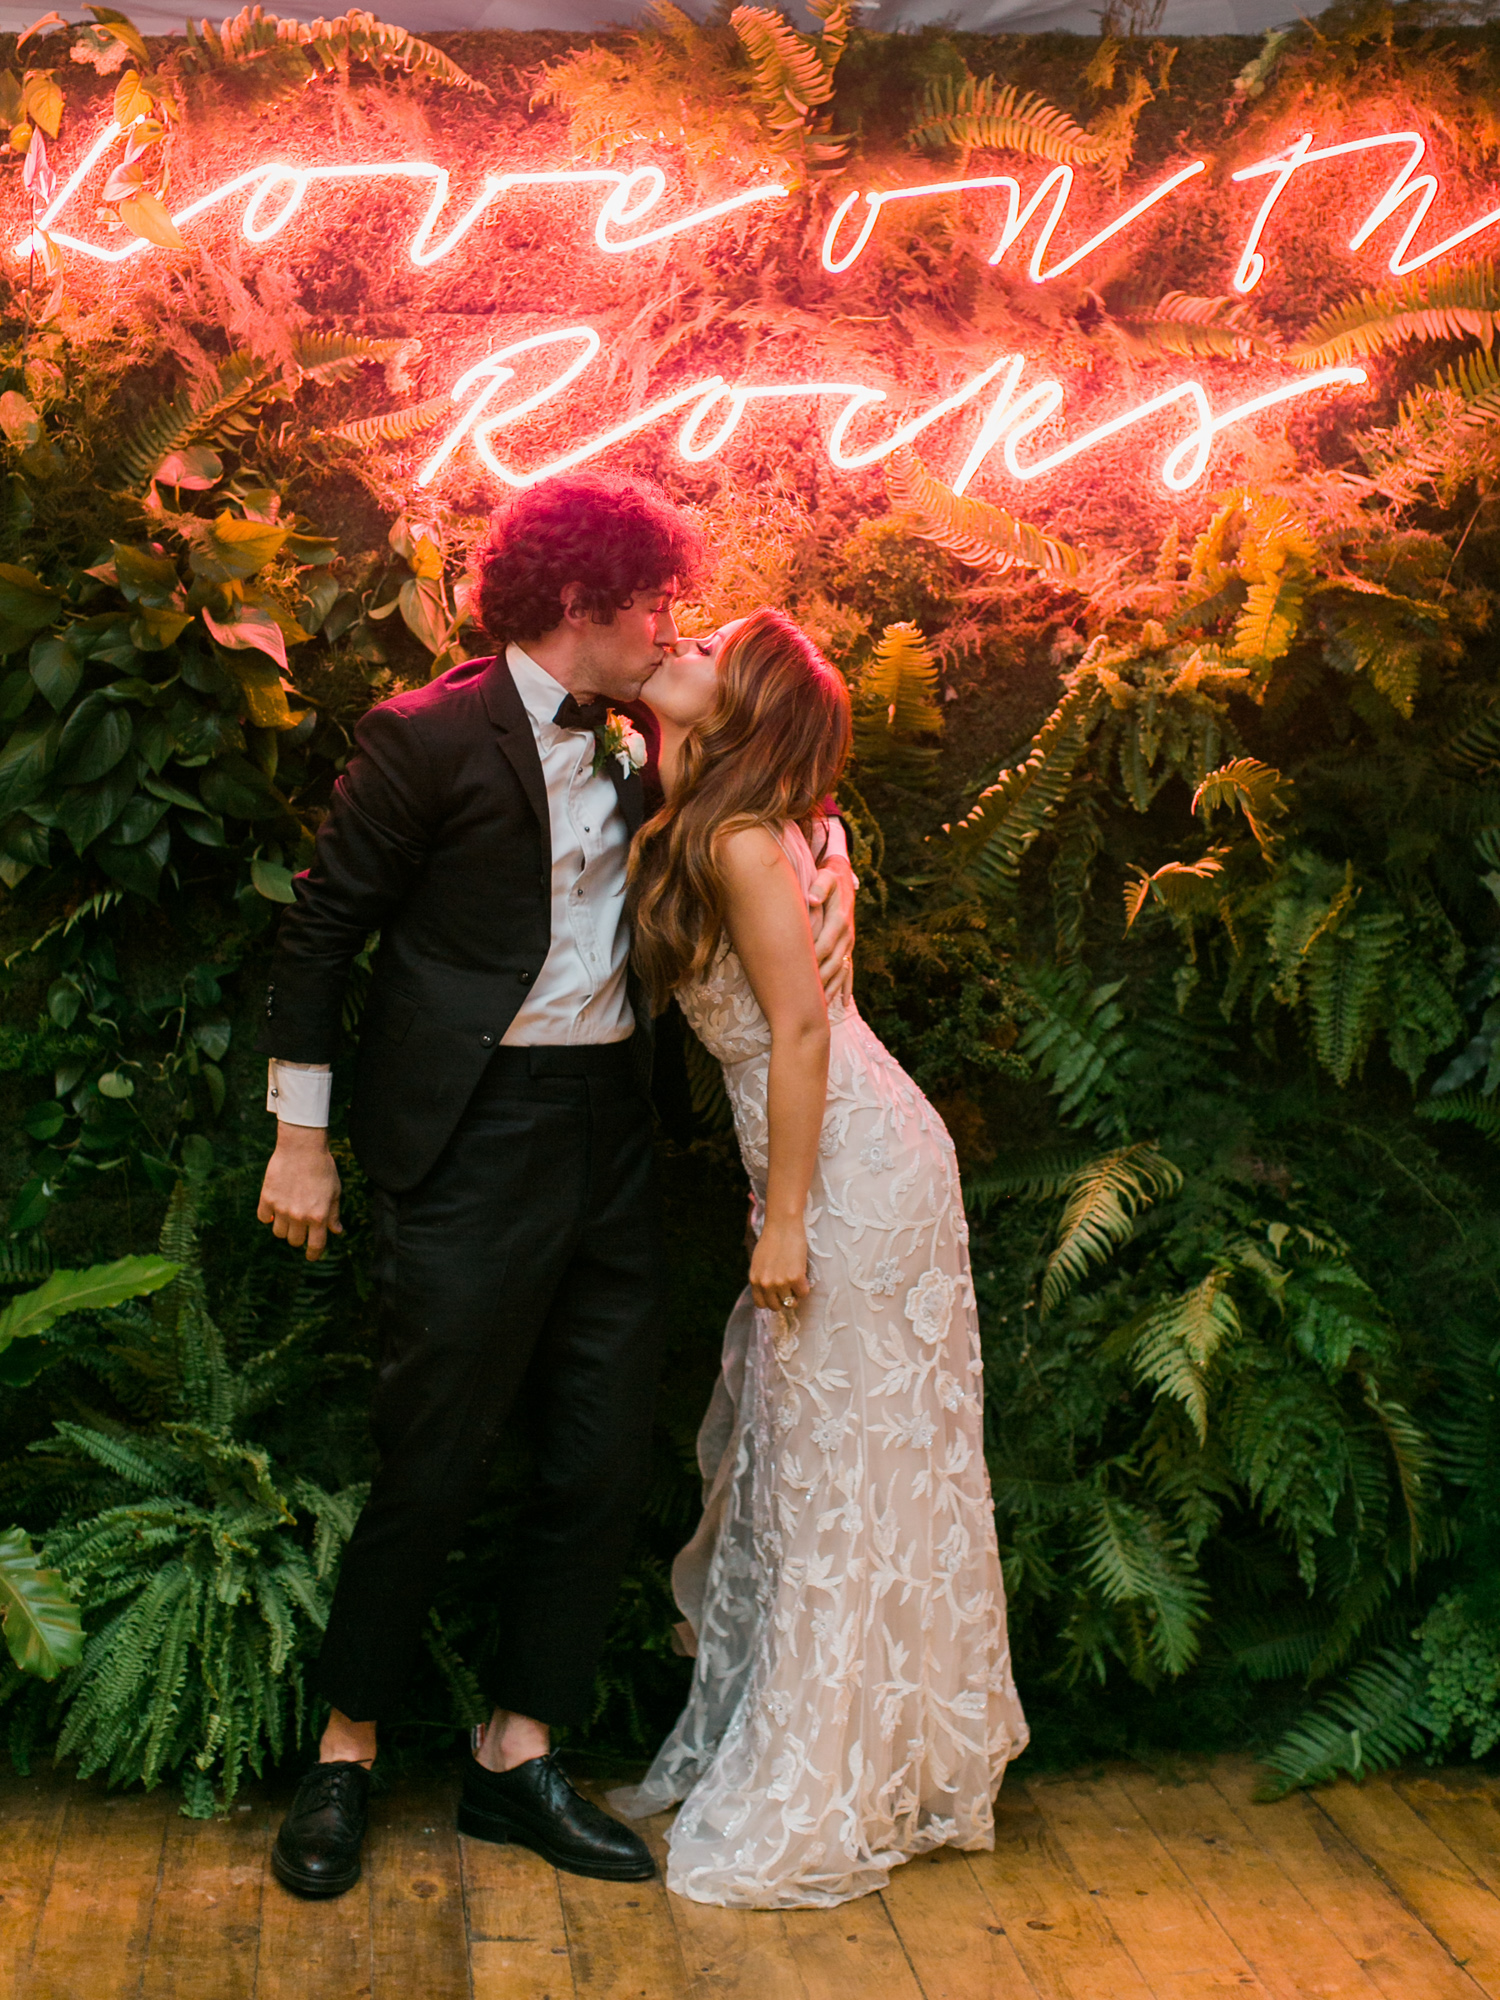 Living Wall display with neon sign. Aspen Wedding. photos by Rachel Havel 